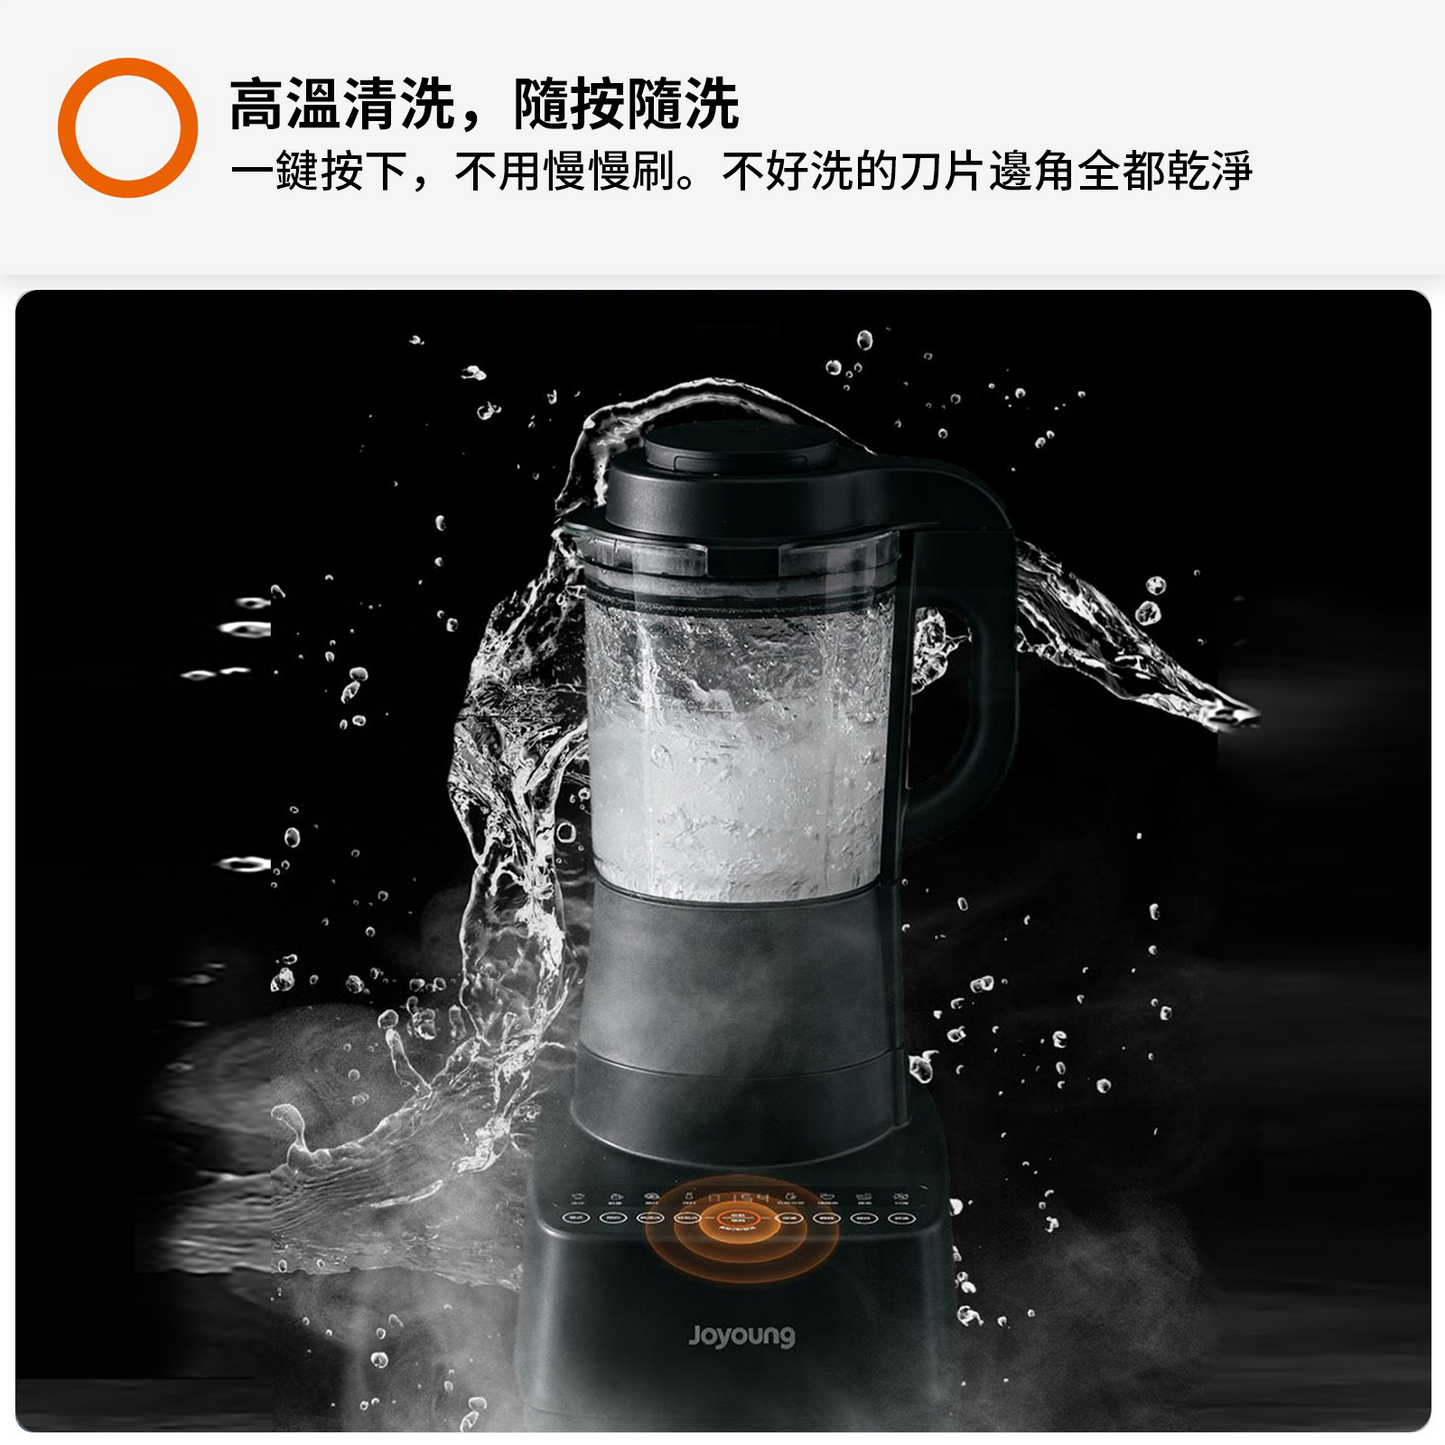 JOYOUNG JOYOUNG L18-Y77M - Multi-Function Automatic Advanced Low-Noise  Smart Heating High-Speed Blender with One-Touch Self-Clea 